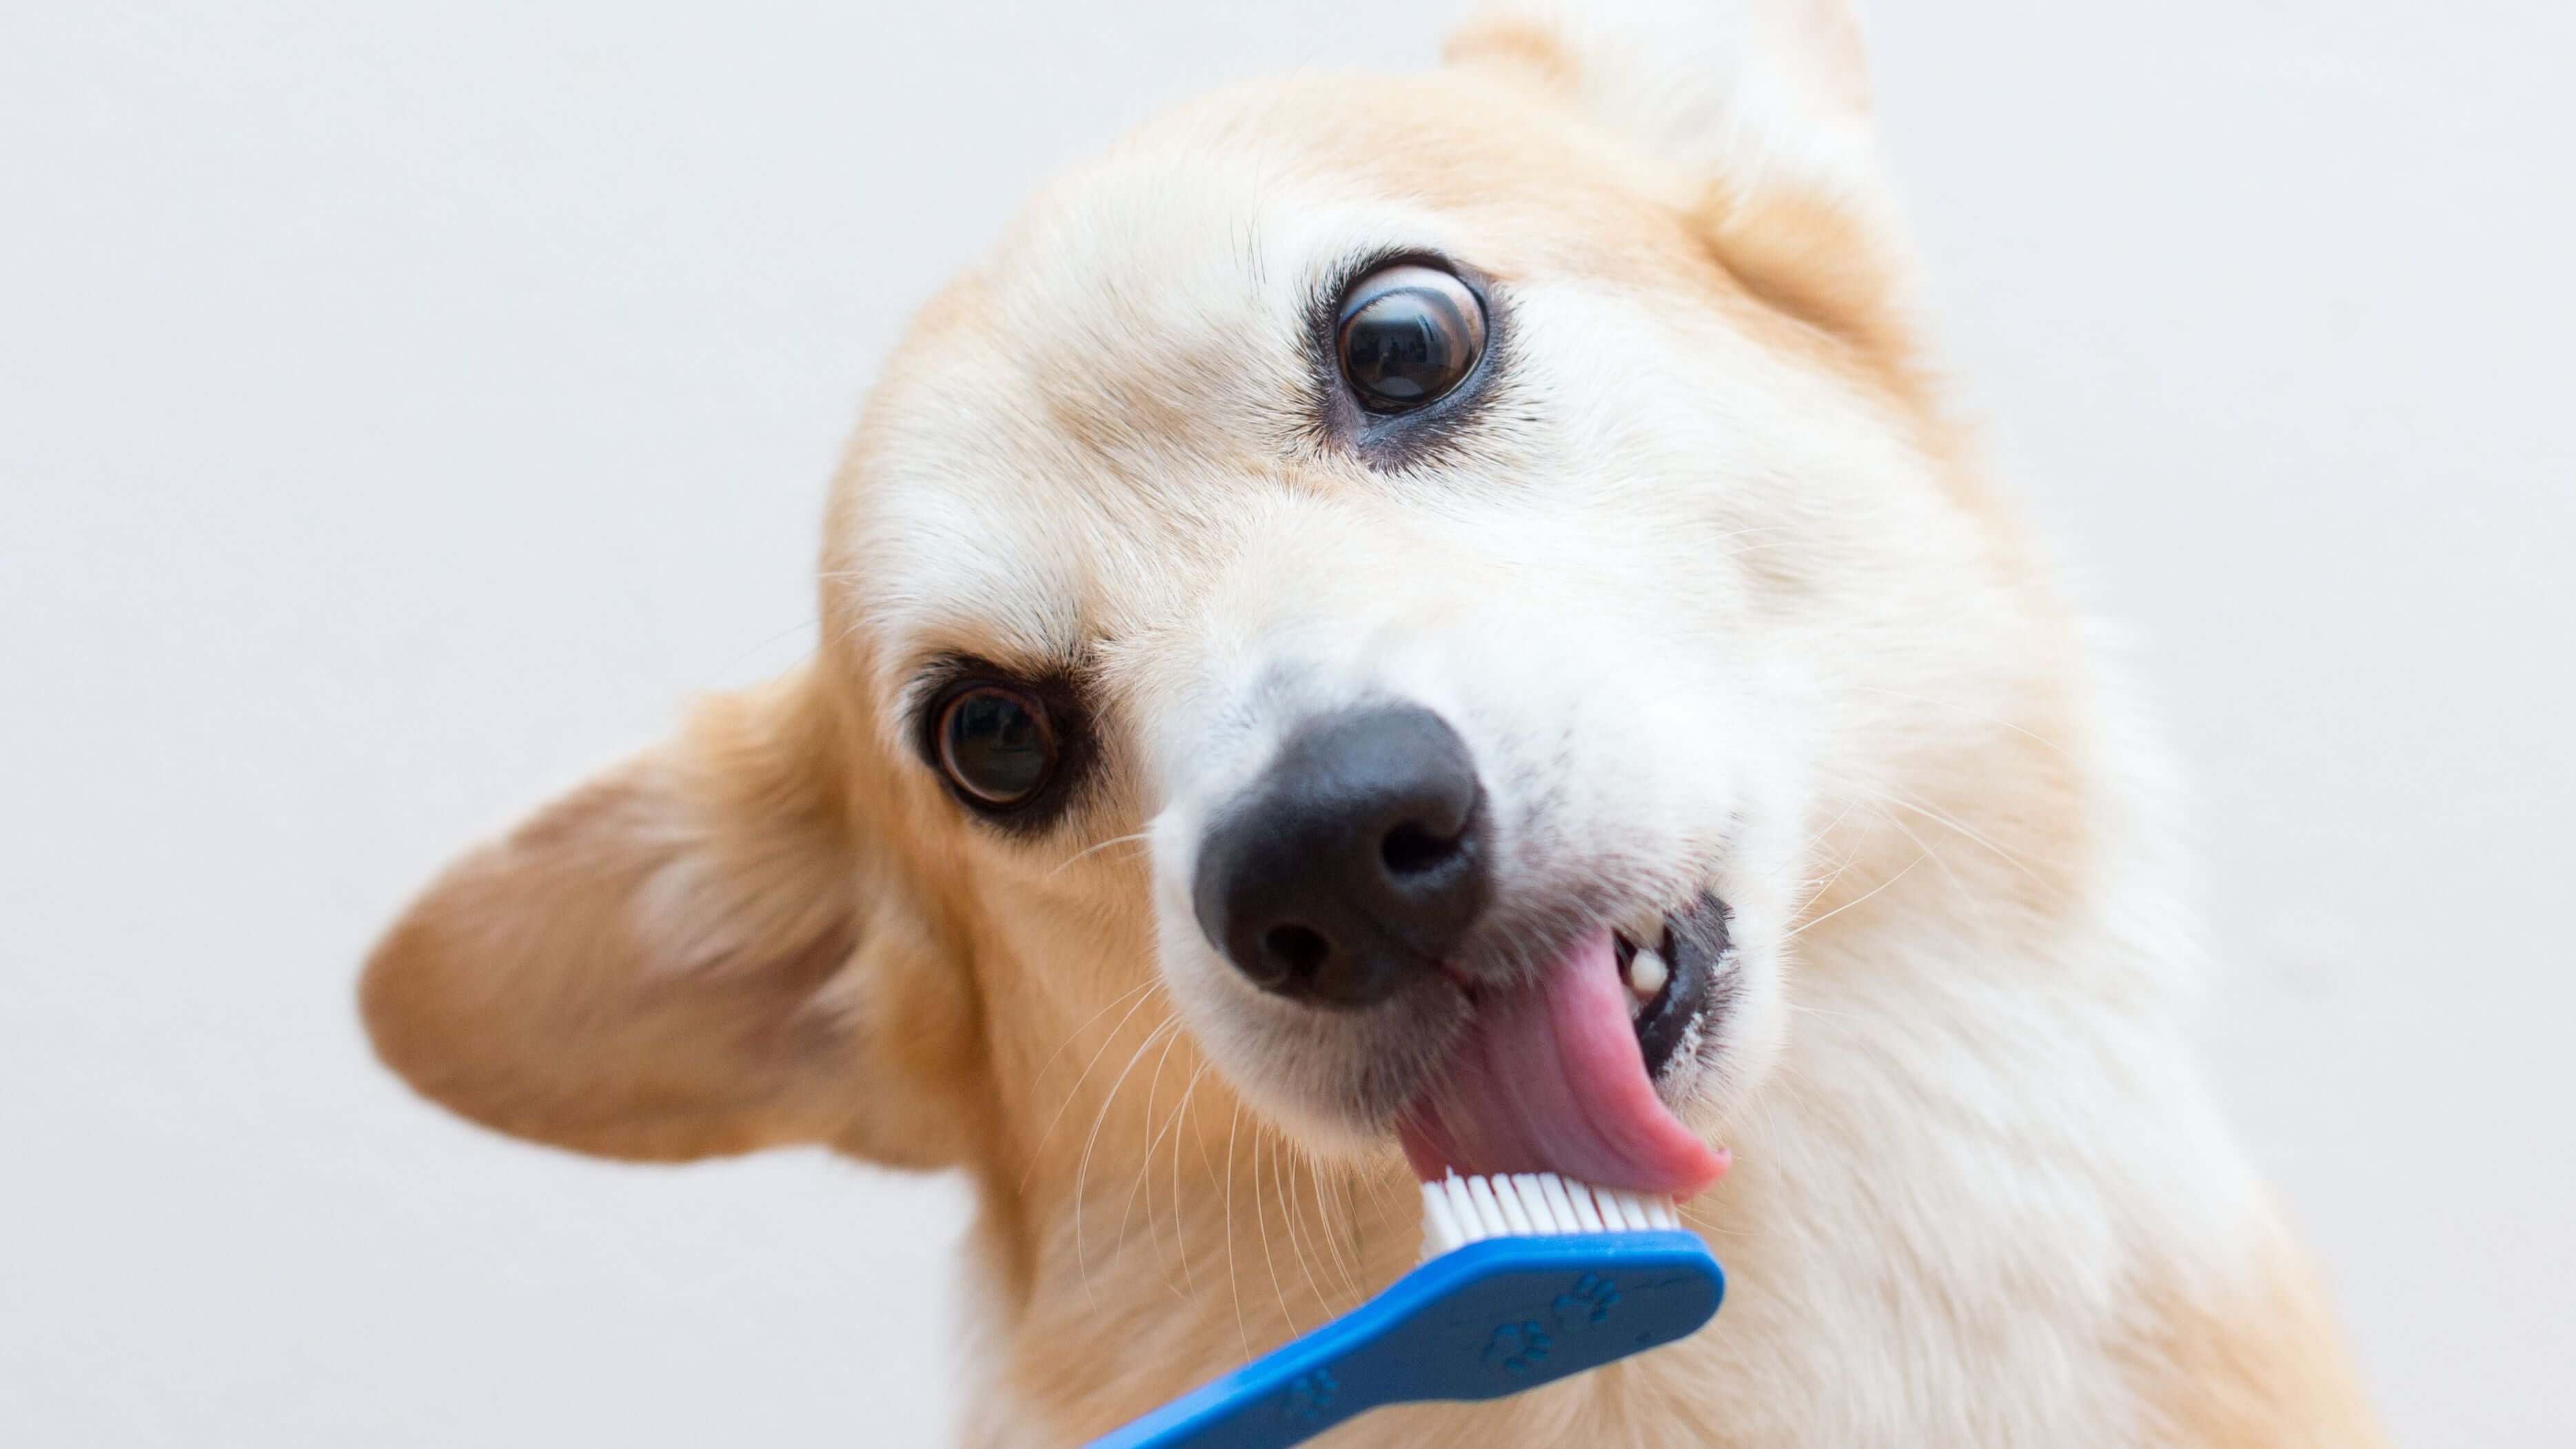 can i use a normal toothbrush for my dog